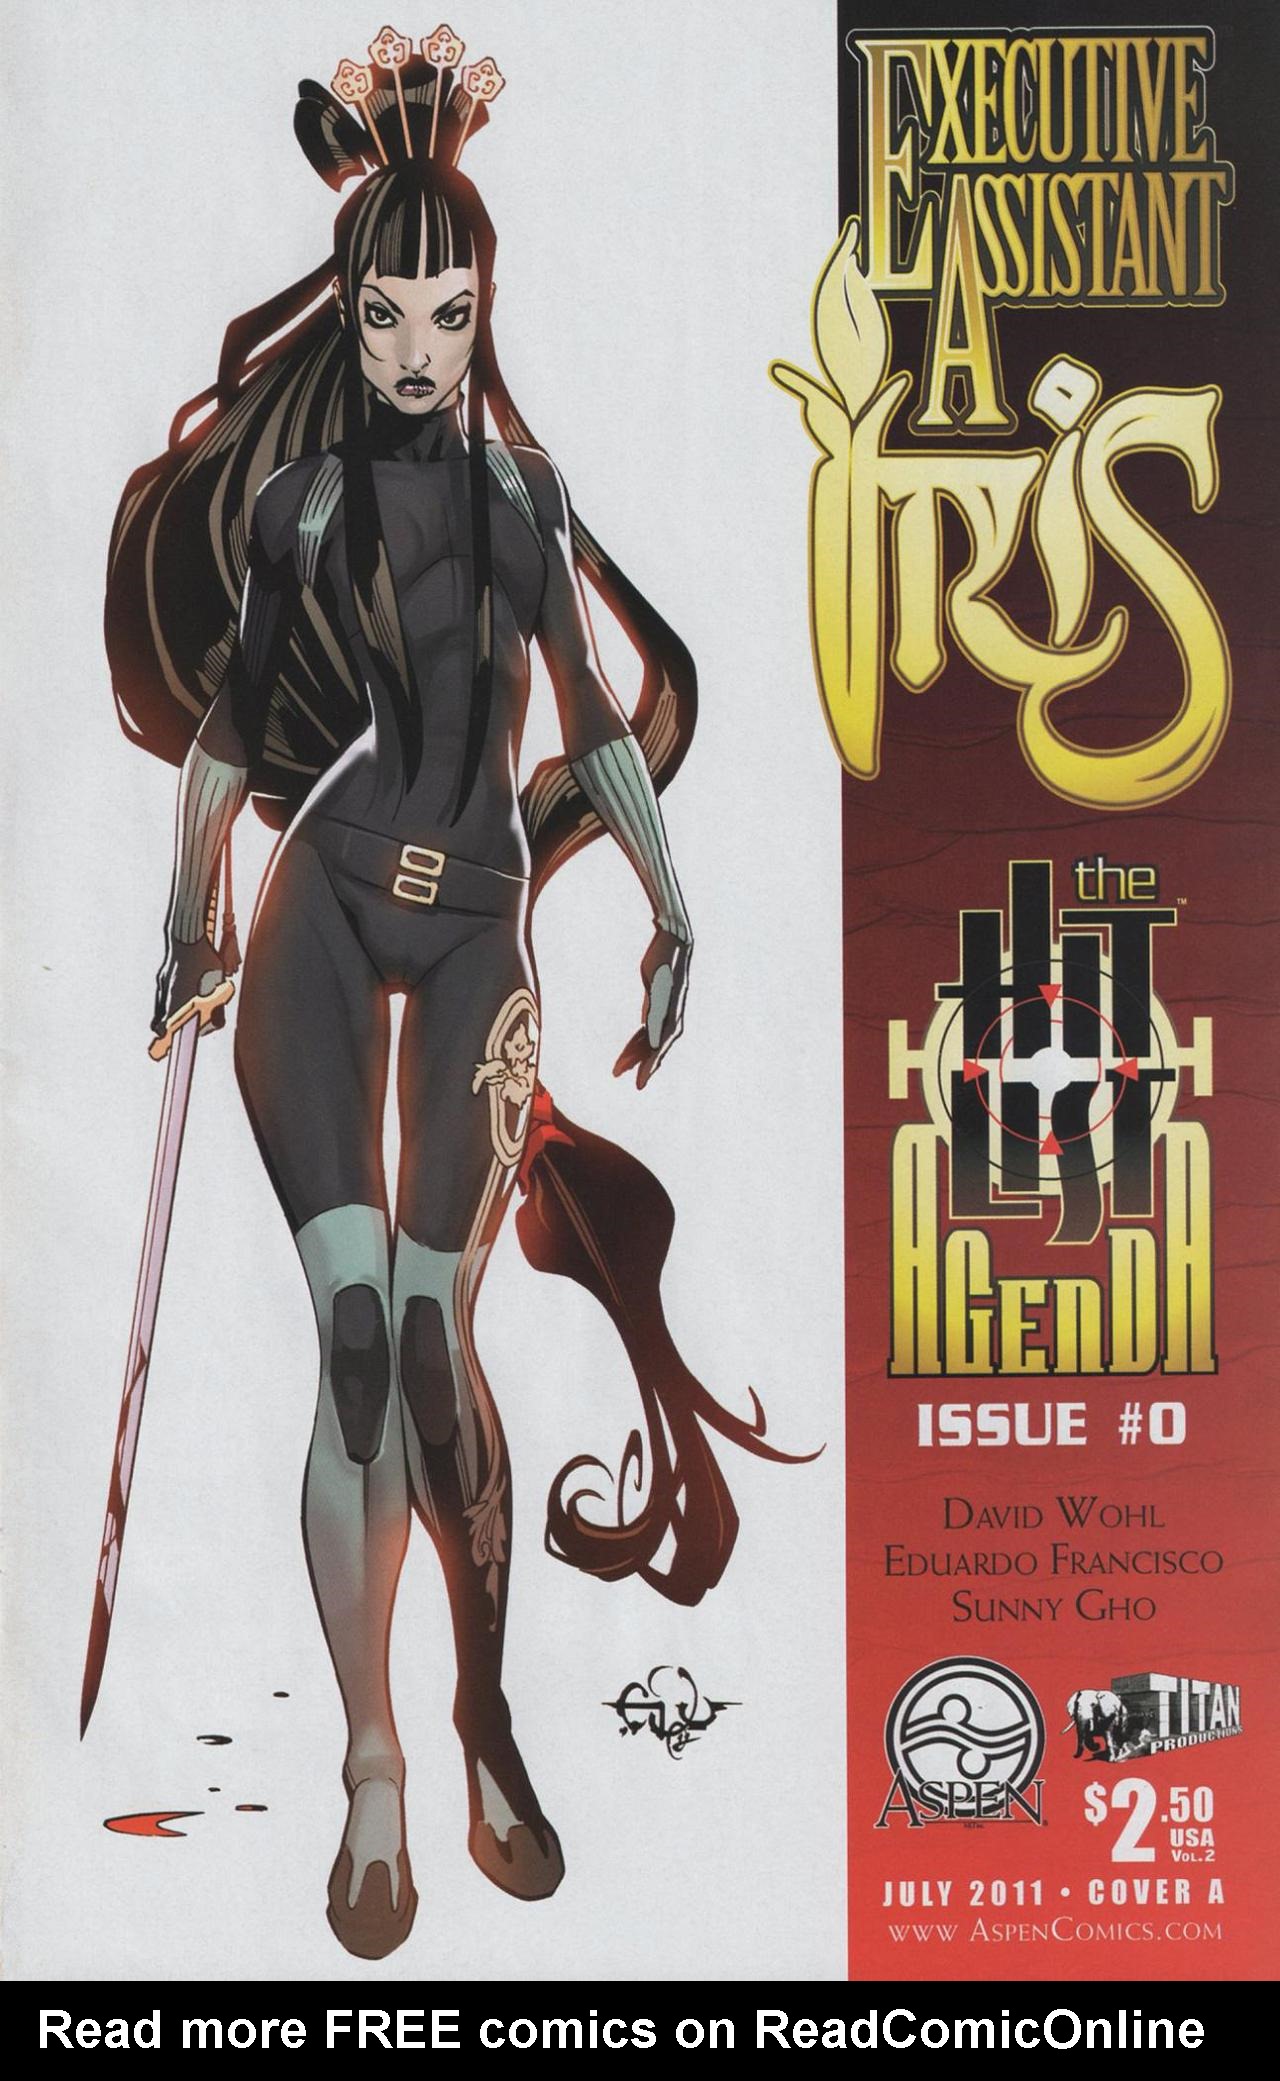 Read online Executive Assistant Iris (2011) comic -  Issue #0 - 1